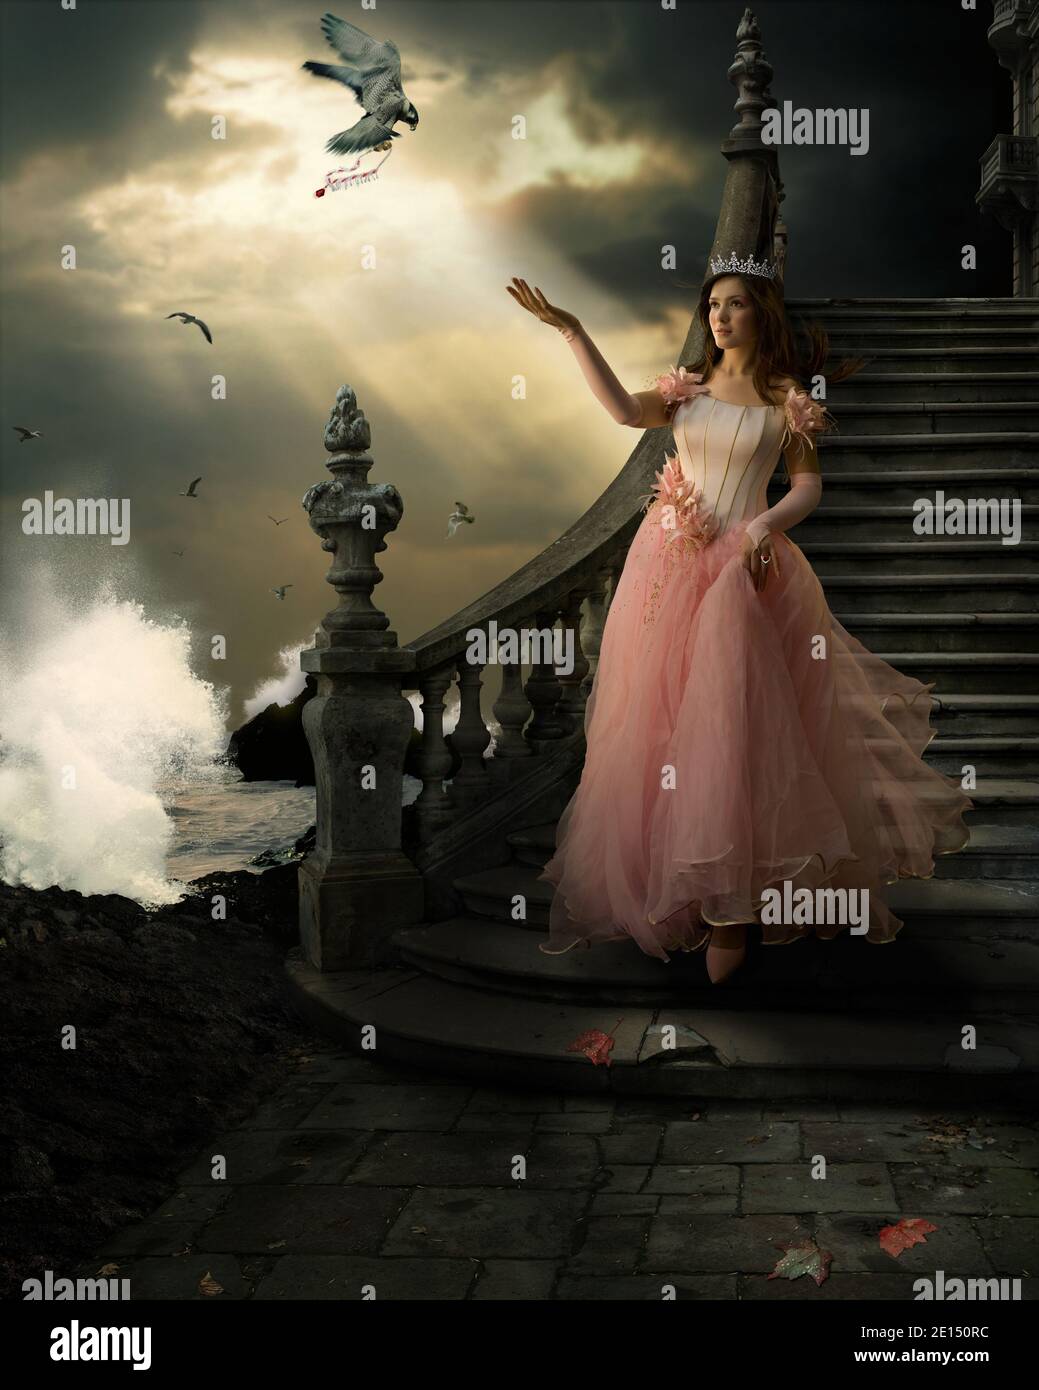 surreal fairy tale art background with girl in pink dress, sea, rocks, splashing waves, and seagulls flying Stock Photo